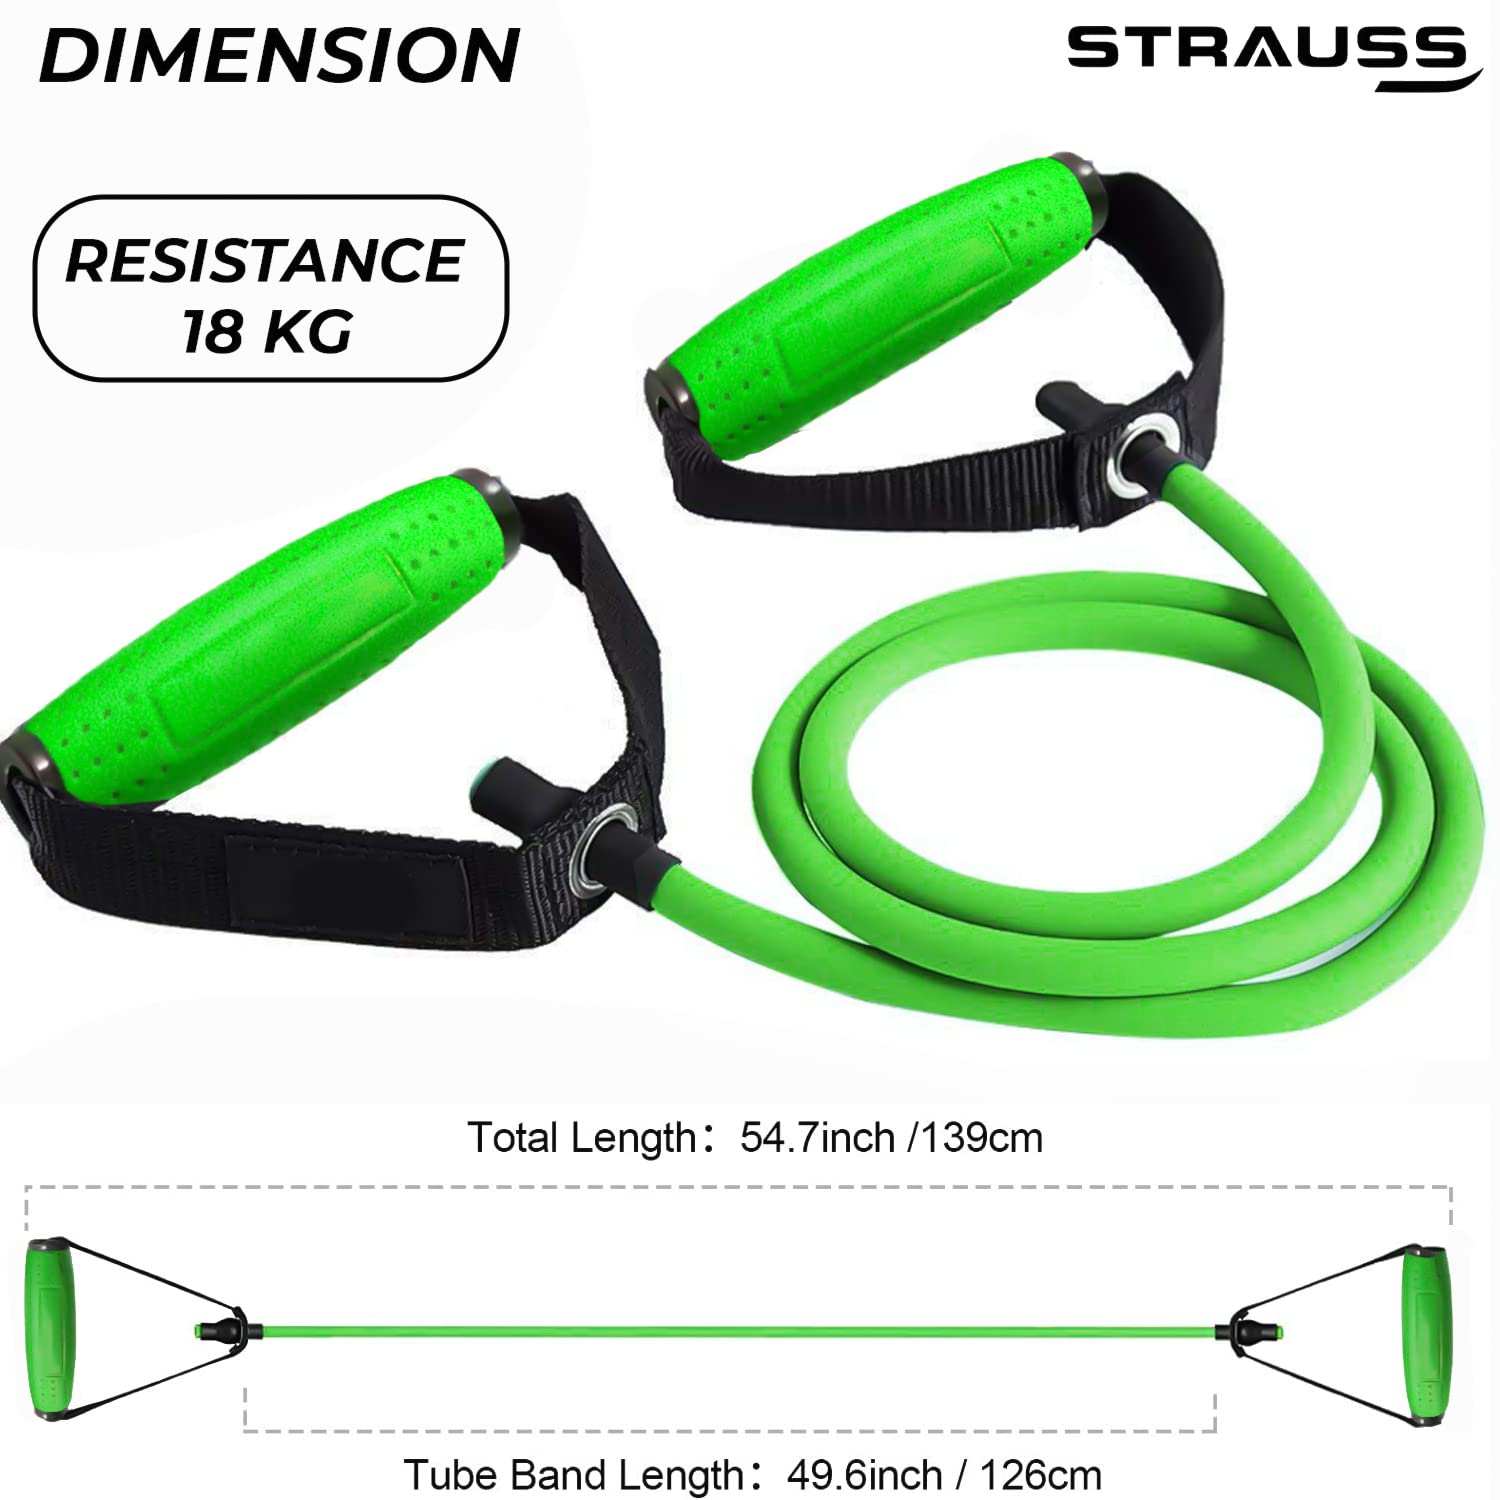 Strauss Single Resistance Tube with PVC Handles, Door Knob & Carry Bag, 18 Kg, (Green)